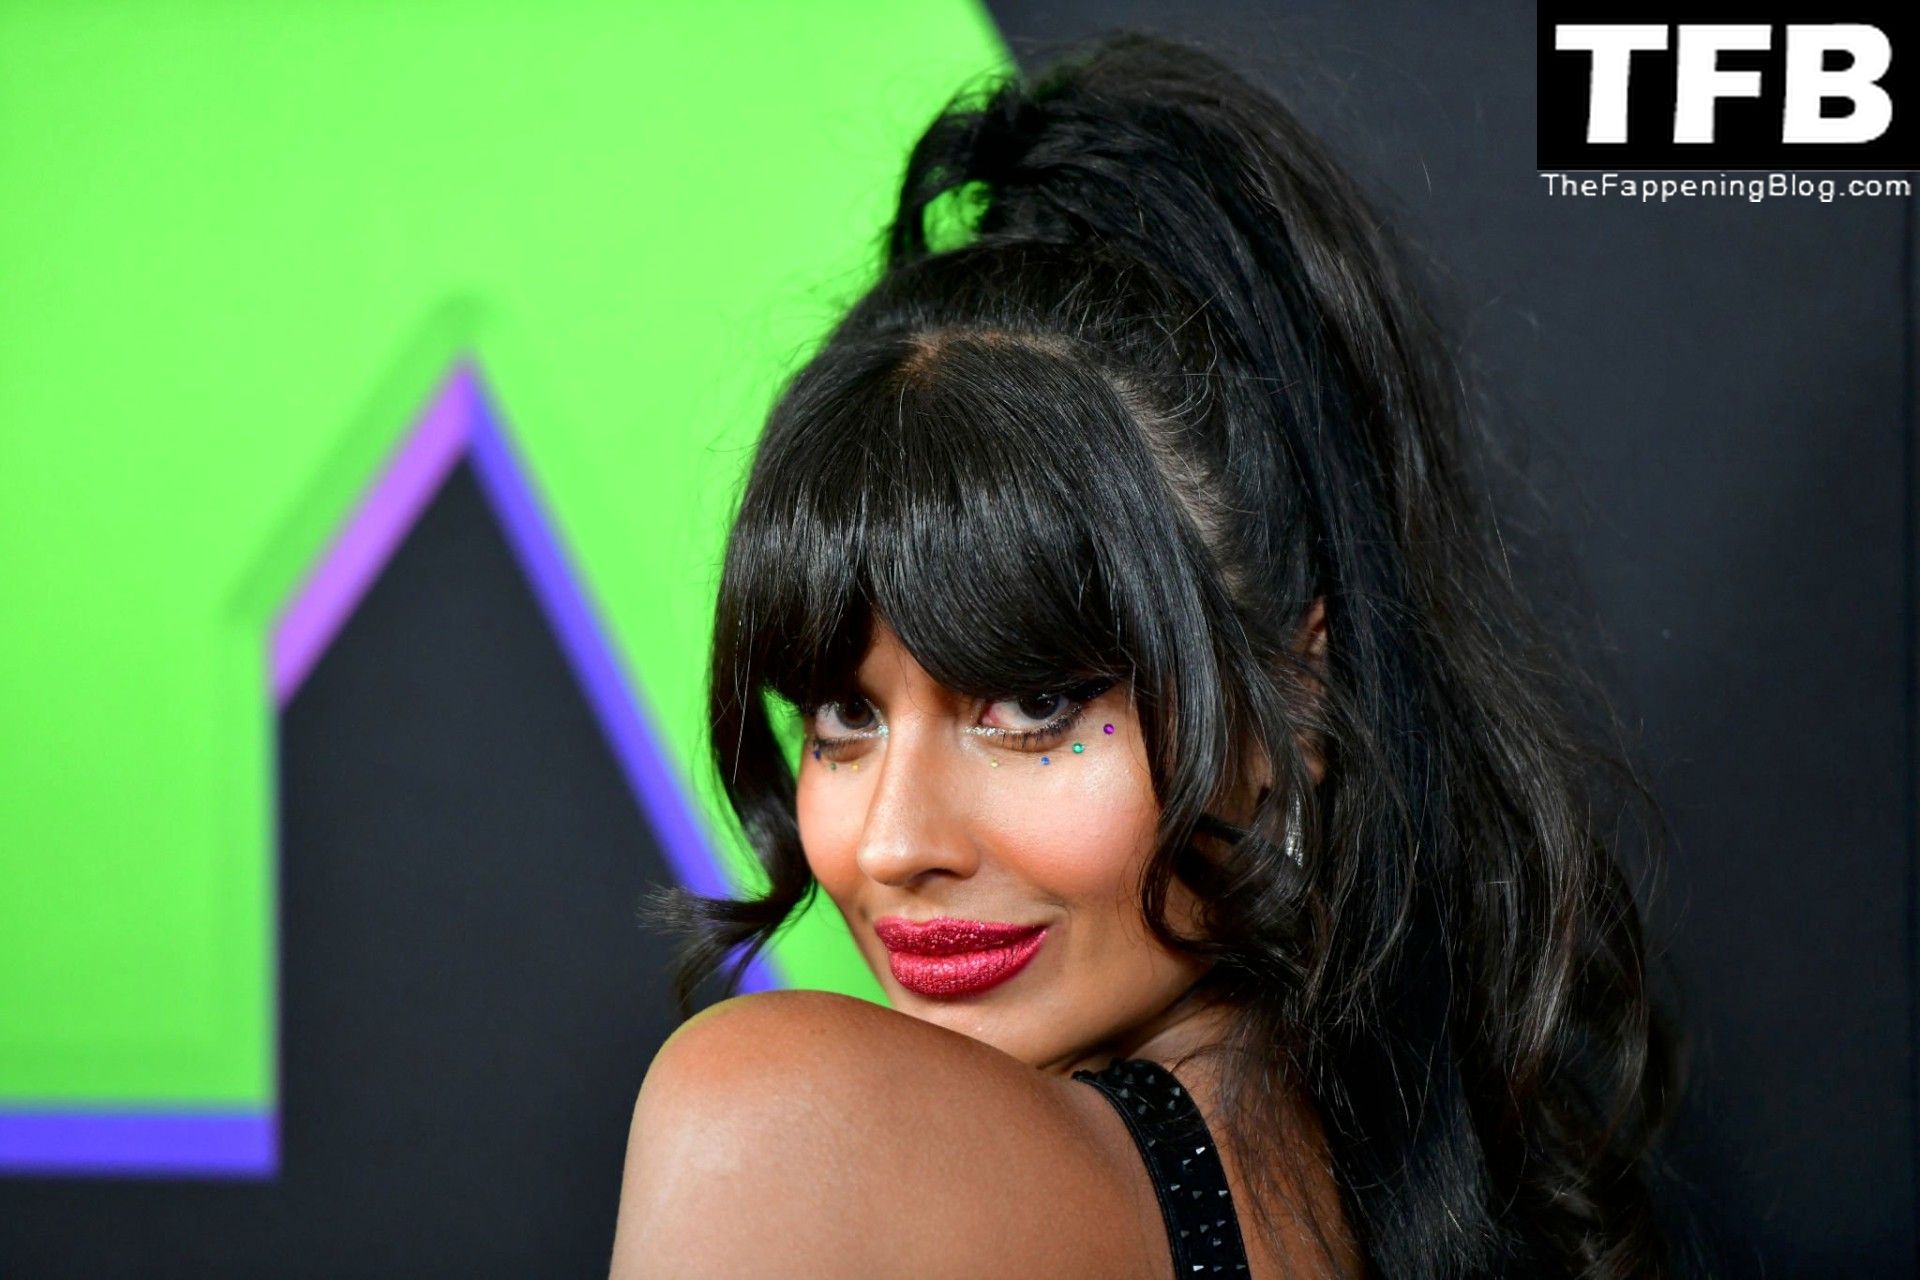 Jameela Jamil Flaunts Her Big Tits at the Premiere of Disney+’s “She Hulk: Attorney at Law” in LA (53 Photos)